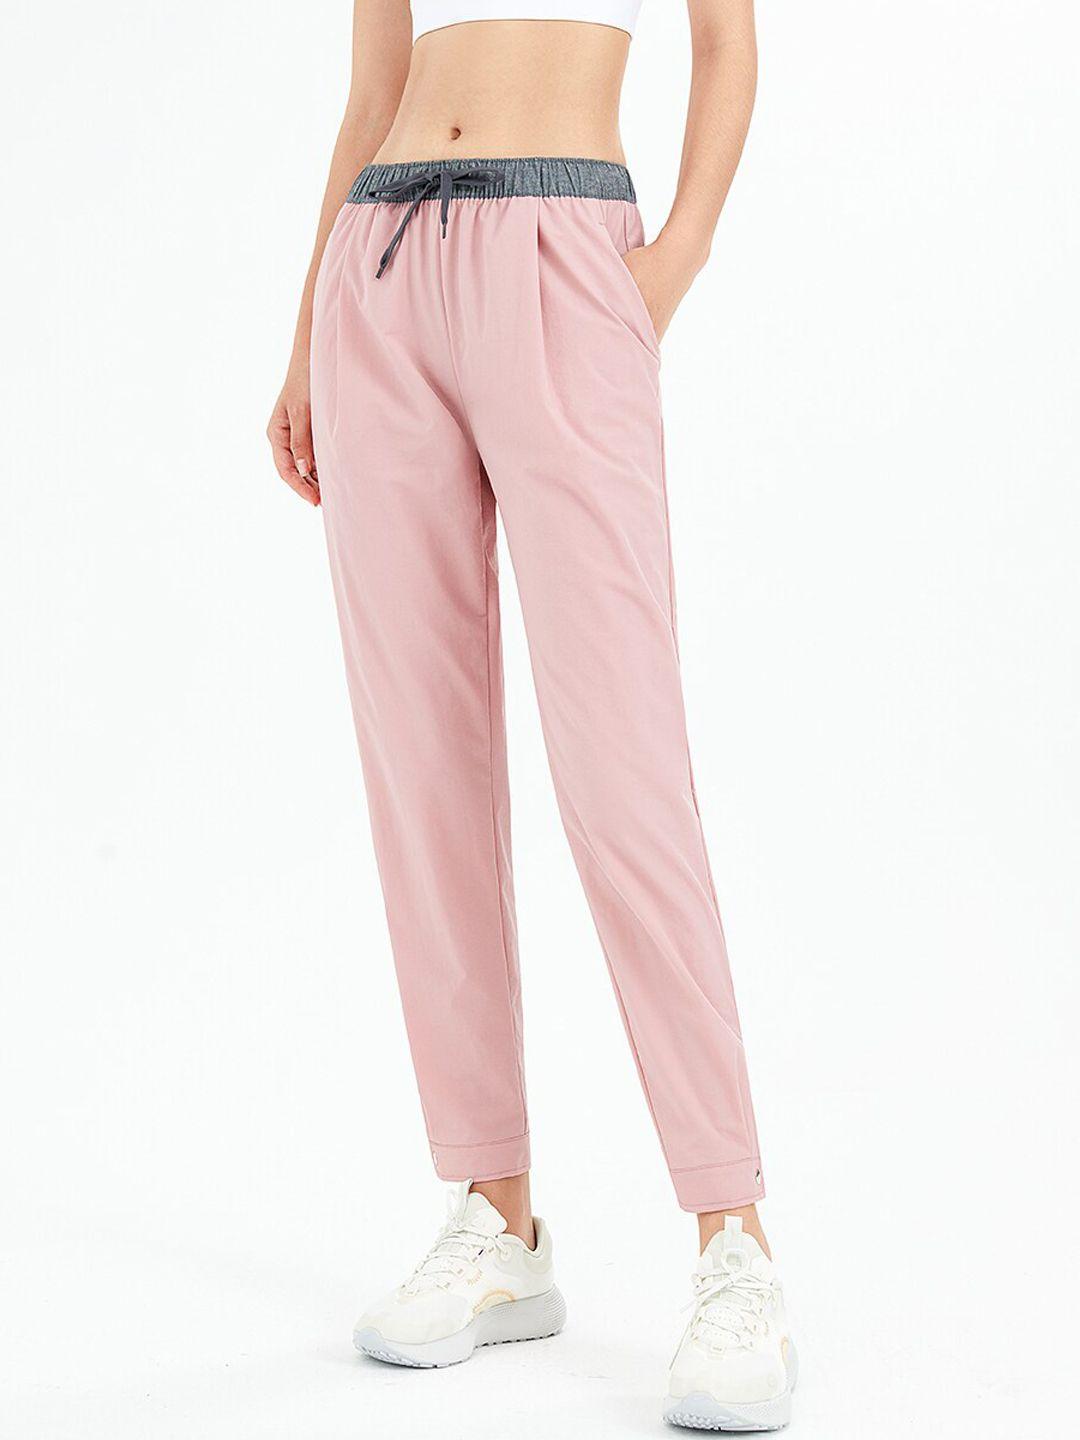 jc collection women pink solid relaxed fit track pants